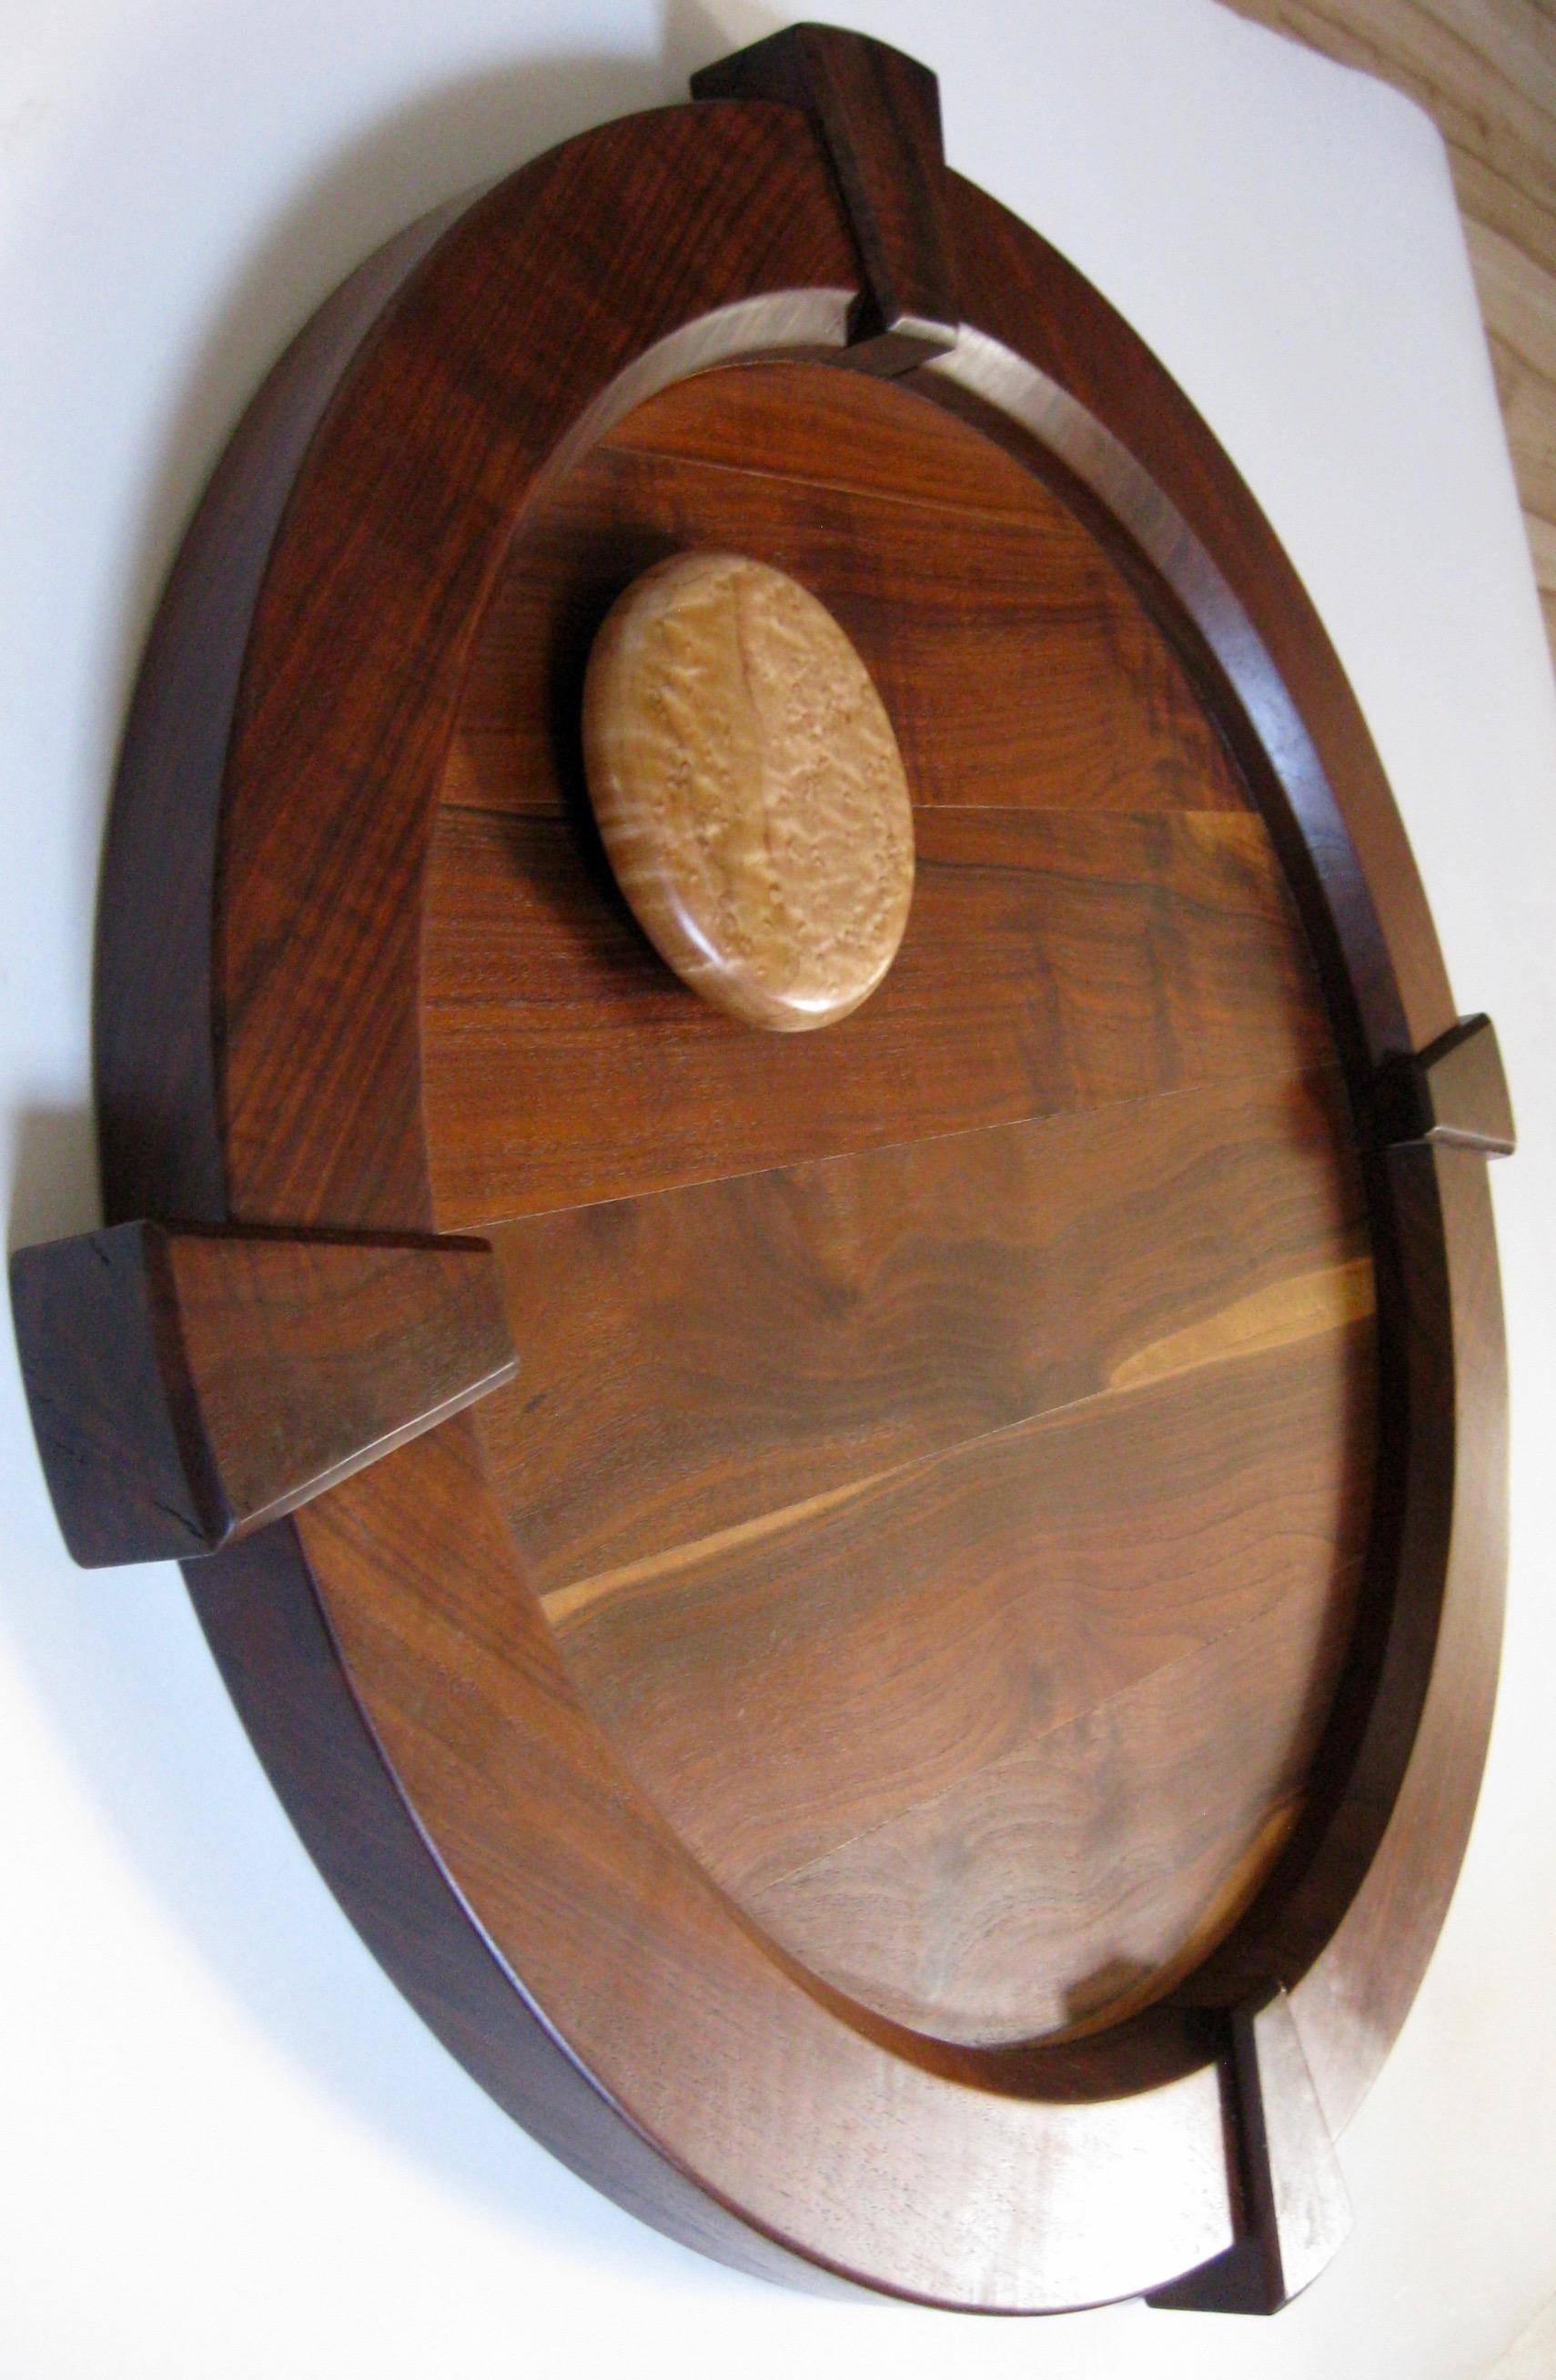 Made of solid walnut and bird's-eye maple wood, this large wall hanging is by Southern California artists Jerry & Jan Coker. Signed 